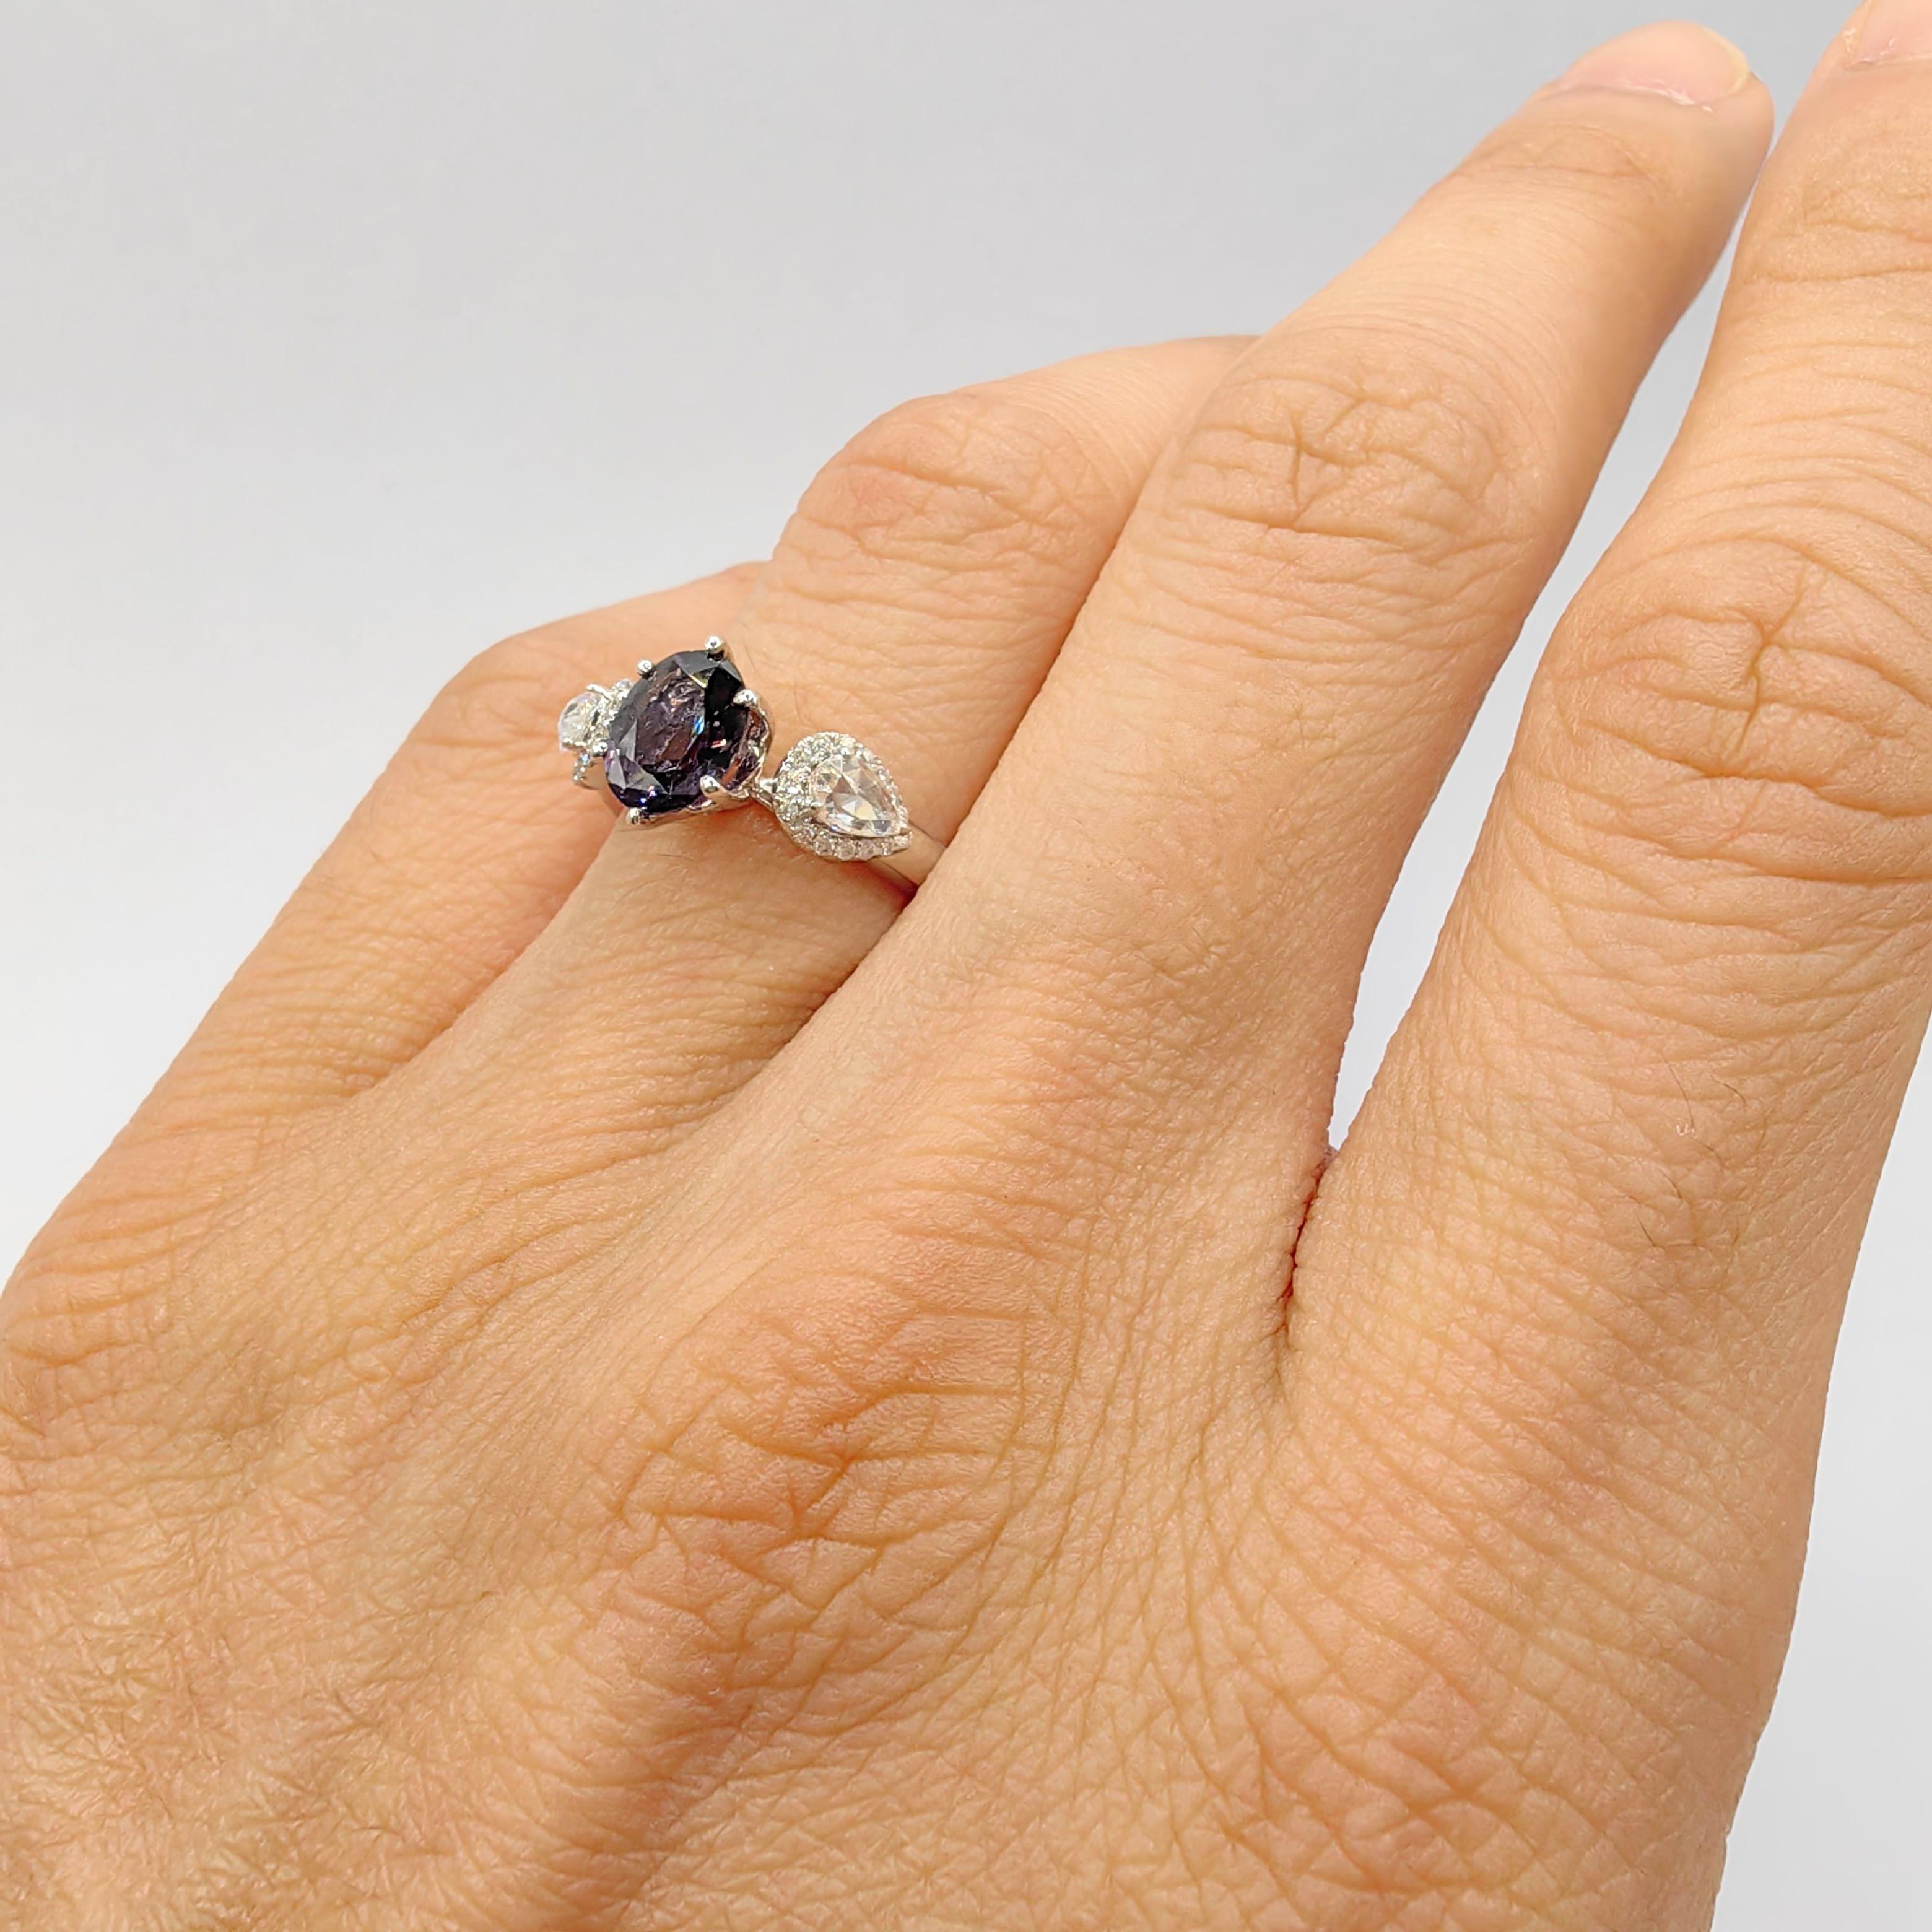 1.19 Carat Oval Cut Purple Spinel Rose Cut Halo Diamond Ring in 18K White Gold For Sale 5